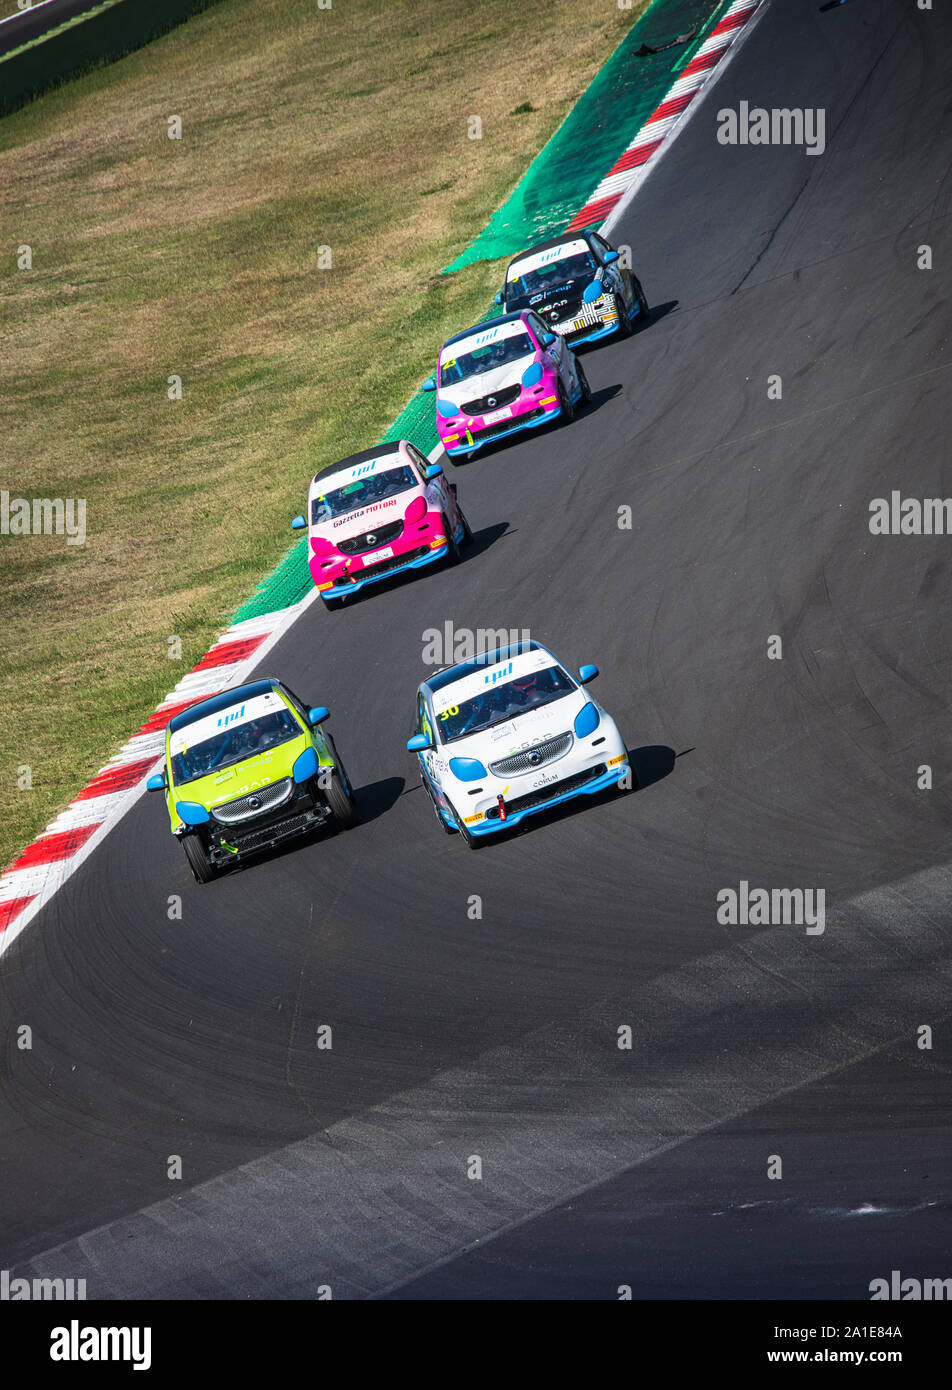 Vallelunga, Italy september 14 2019. High angle view of asphalt circuit with Smart electric engine racing car in action during the race, overtaking at Stock Photo